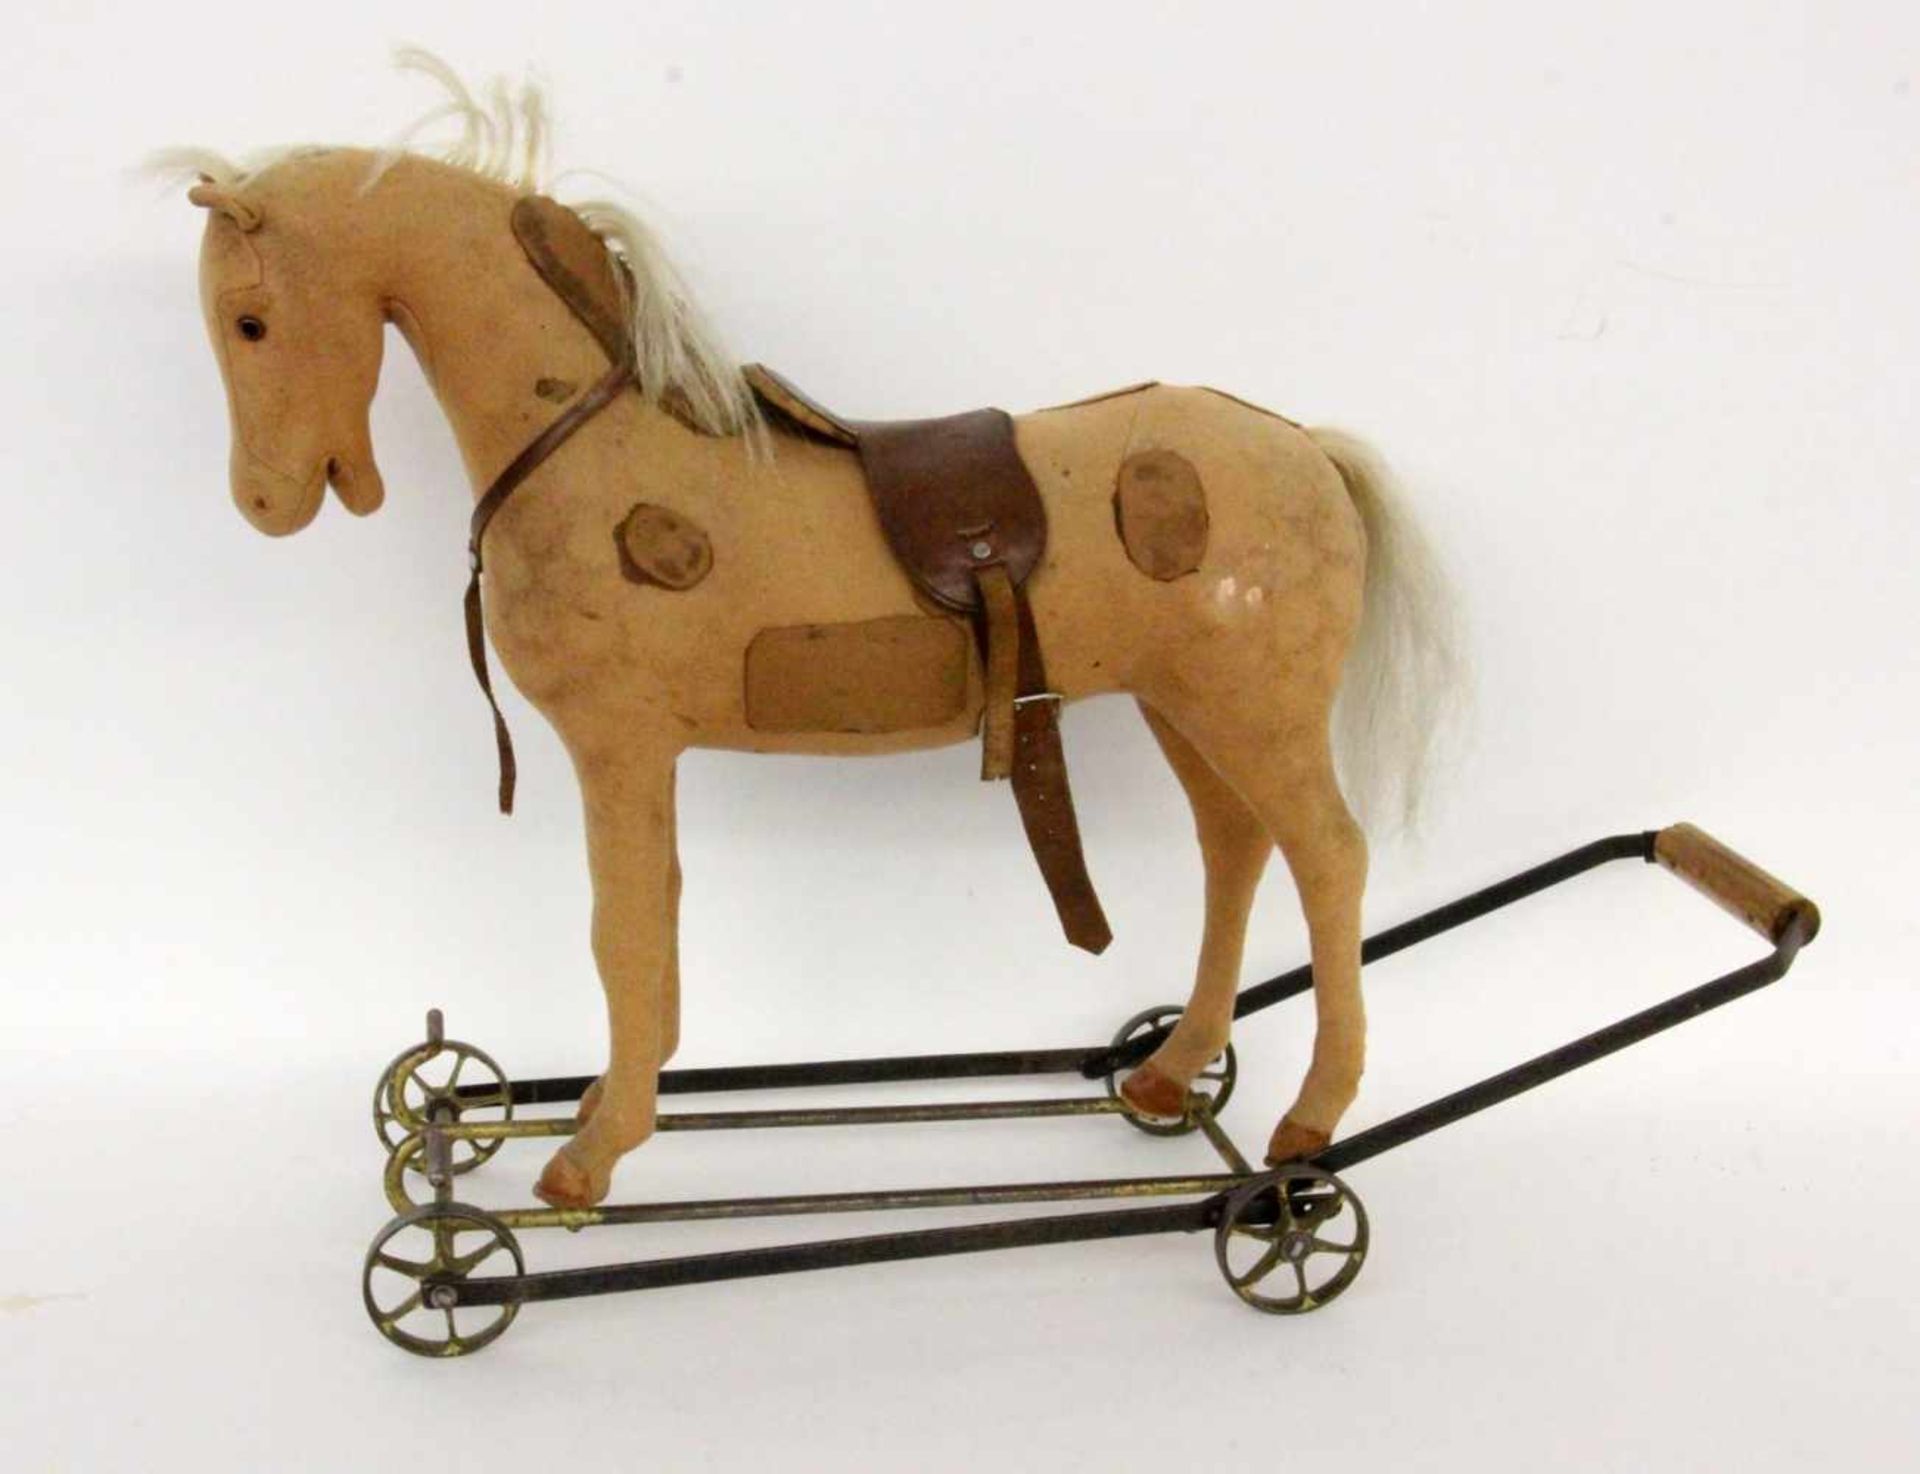 A HORSE ON WHEELS Old. Brown felt with leather saddle. On a metal frame for pushing. 48 cm